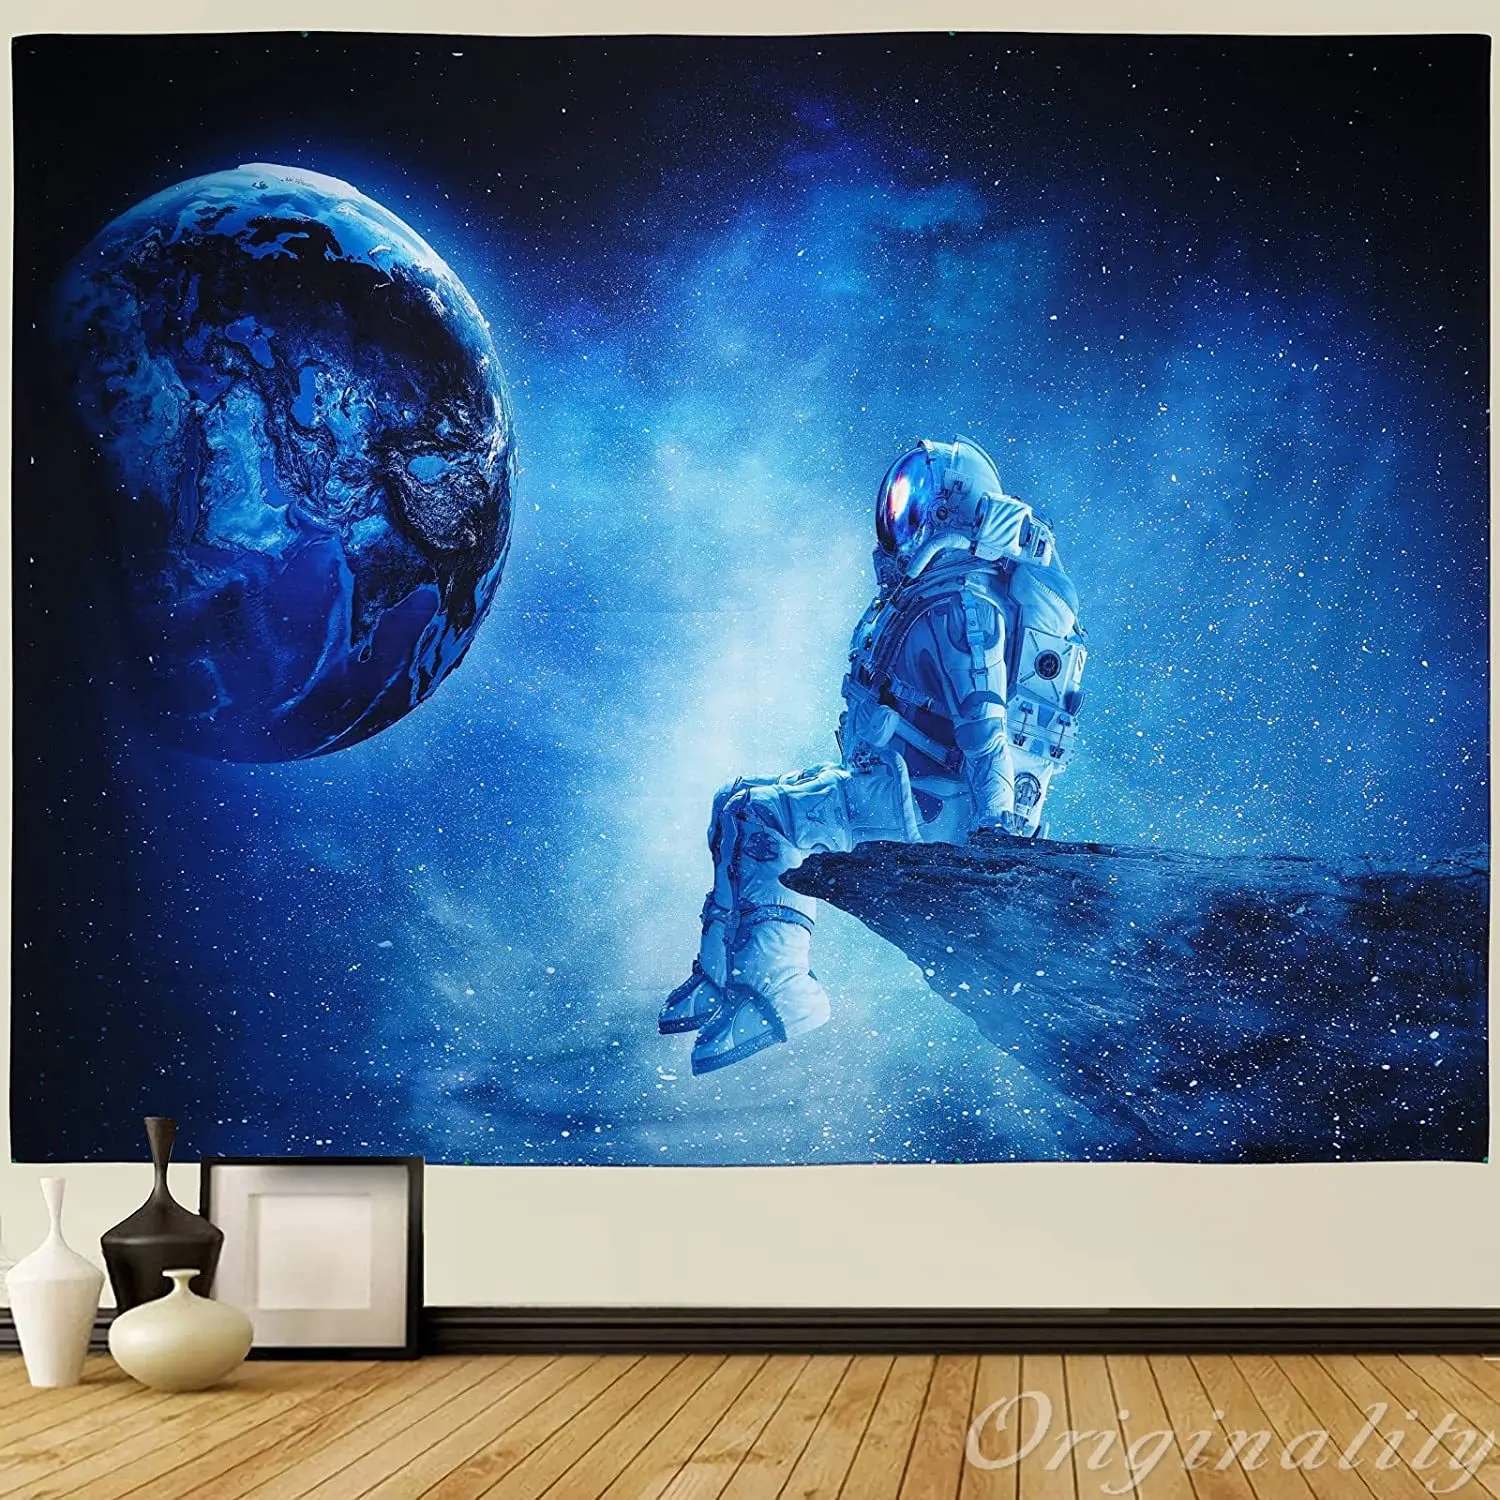 

Astronaut Tapestry Fantasy Space Earth And Universe Wall Art Dormitory Bedroom Decoration